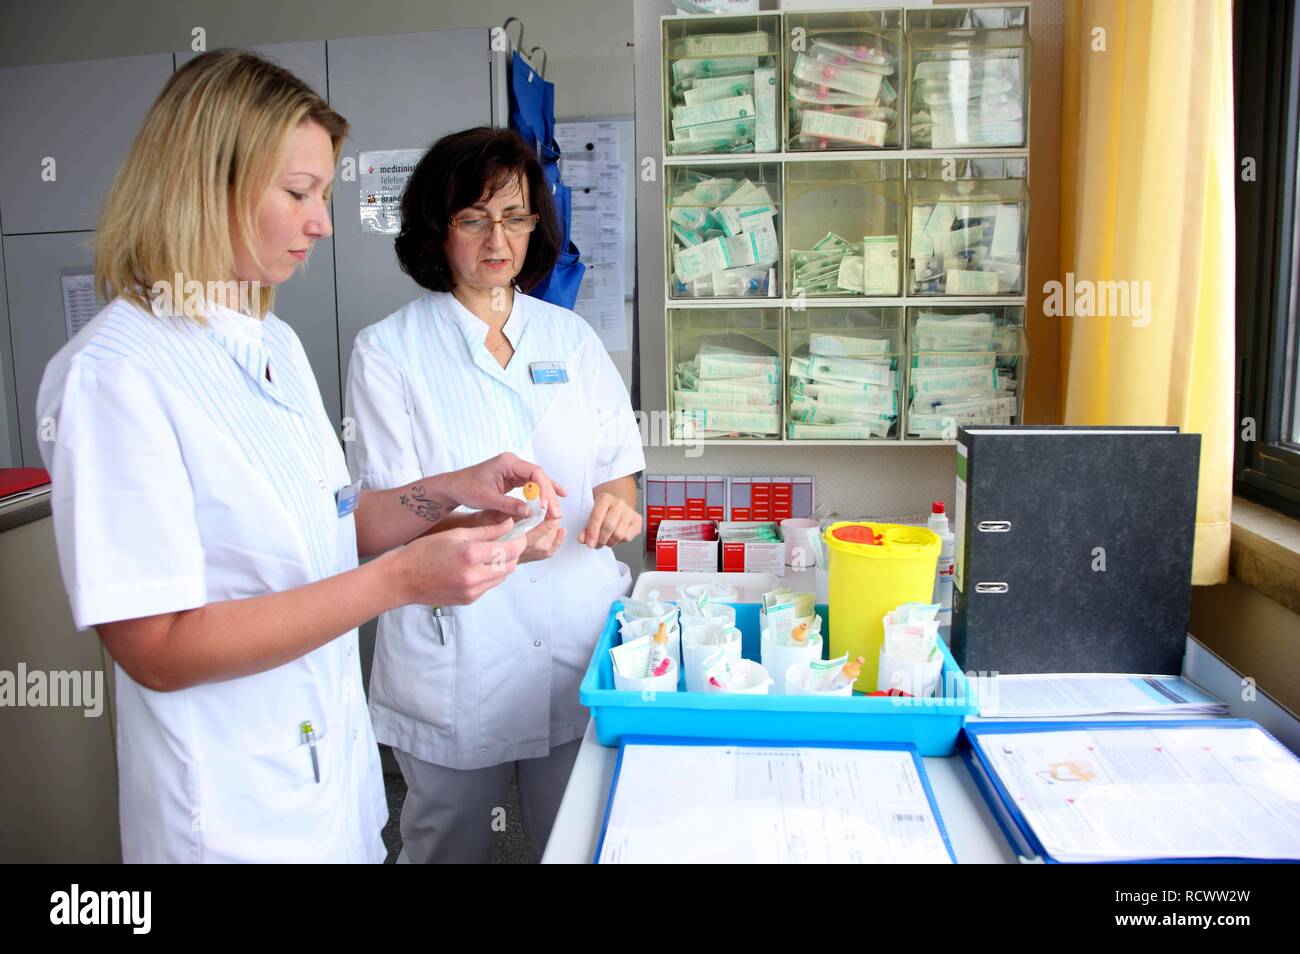 Nurses preparing the documents and medicine for patients in the nurse's station of a hospital Stock Photo